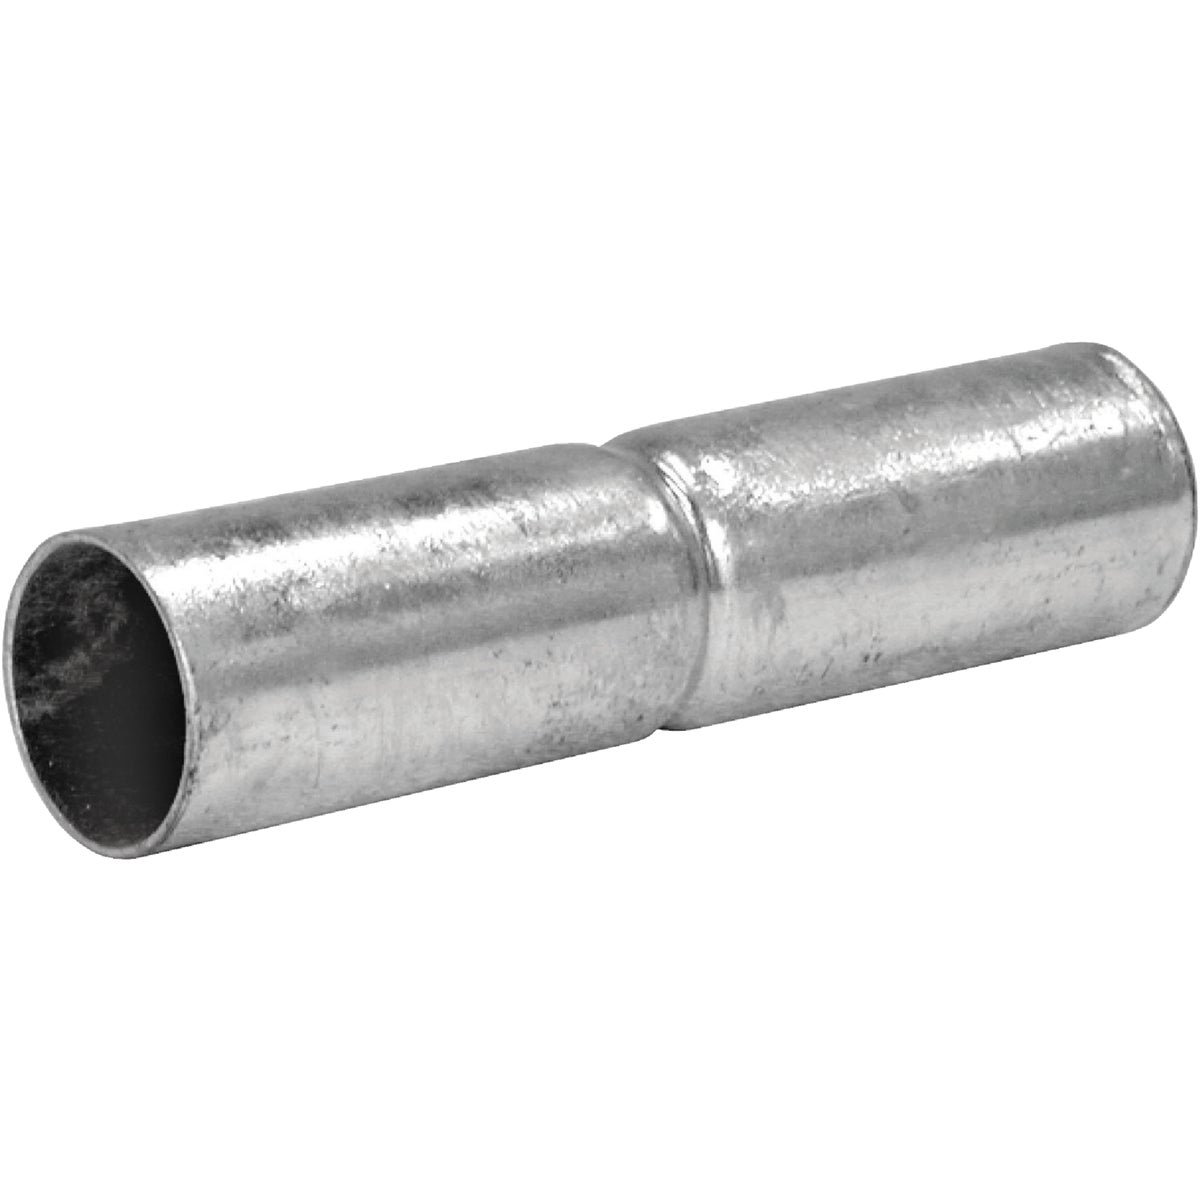 Item 713528, Galvanized top rail sleeve for chain link fence.